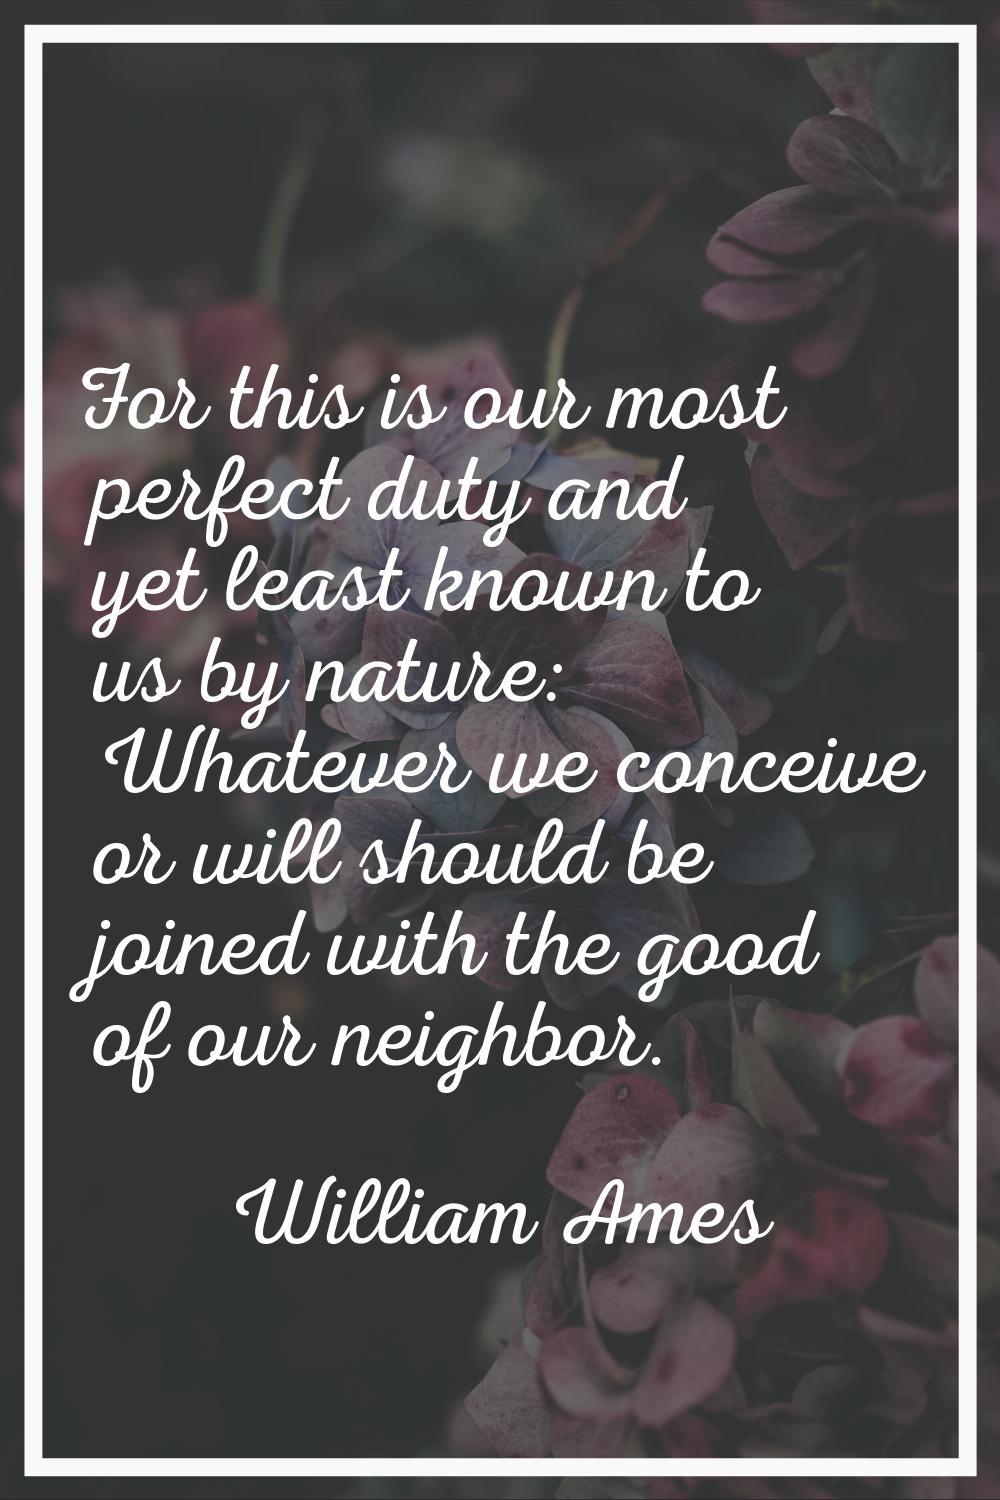 For this is our most perfect duty and yet least known to us by nature: Whatever we conceive or will